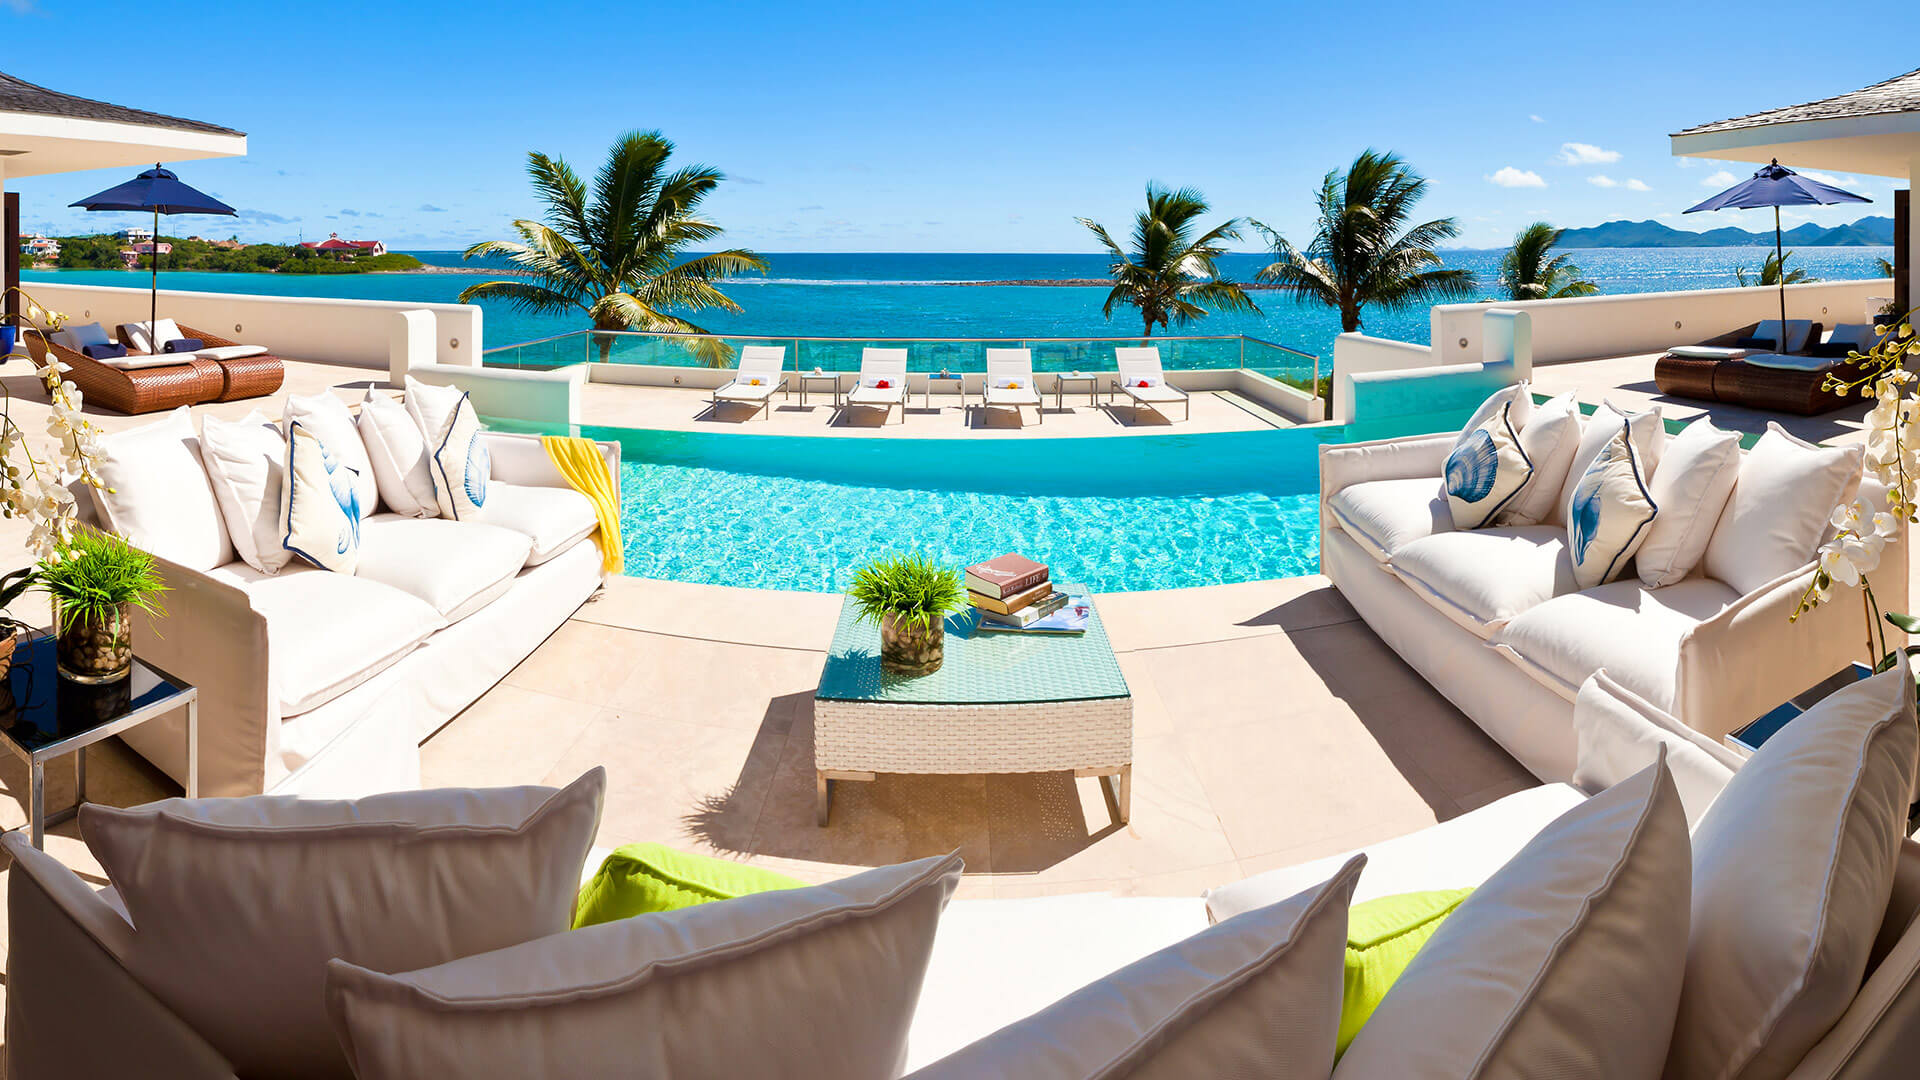 Le Bleu Villa is perfect for groups and extended families in search of a spacious luxury rental on Anguilla — accommodating up to 40 guests when paired with the adjoining sister property.
